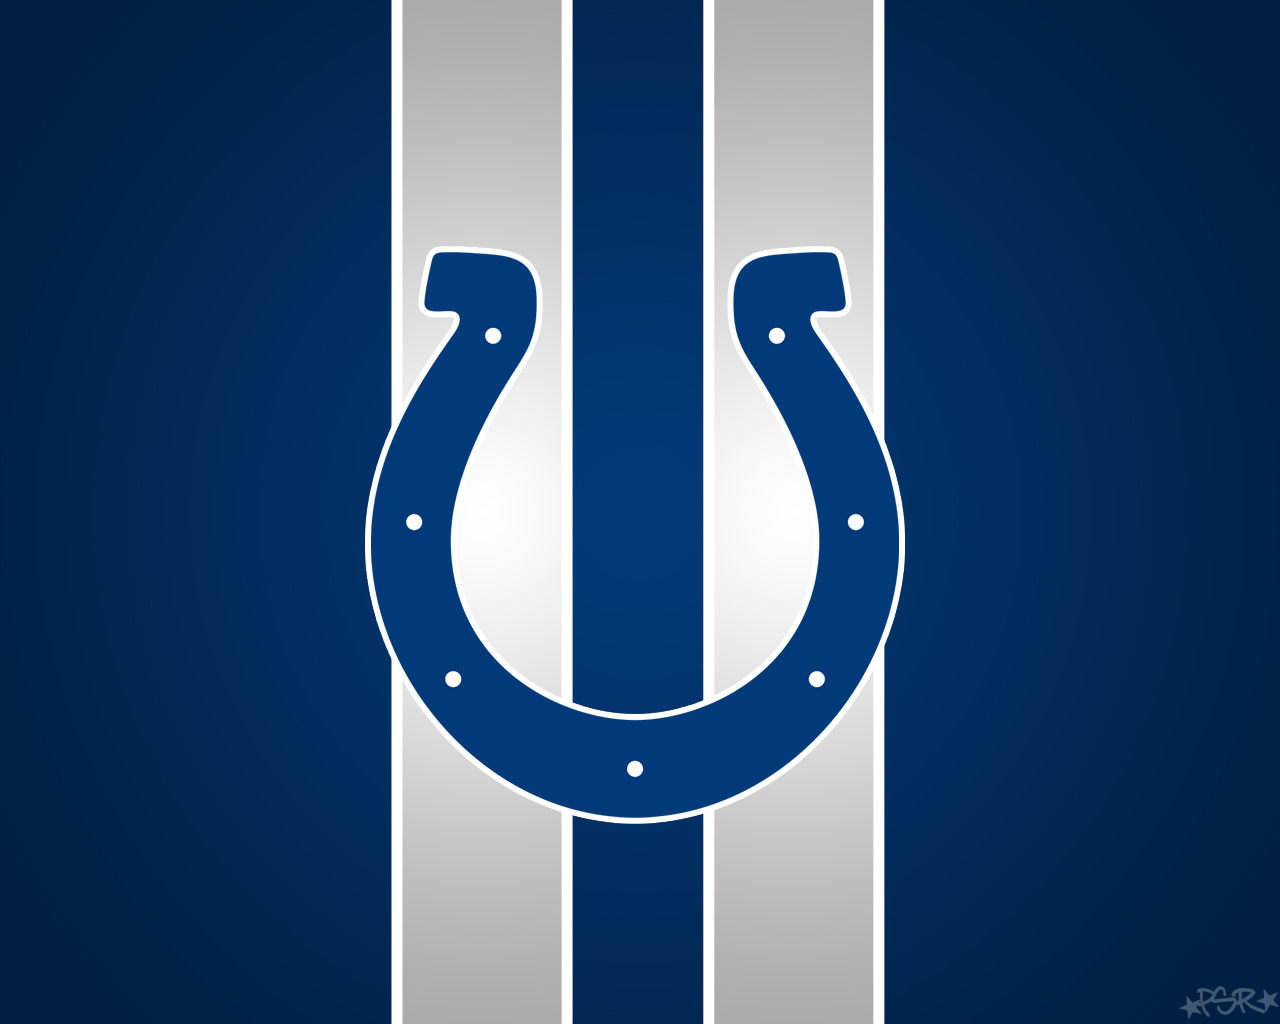 Indianapolis Colts HD Background Wallpaper